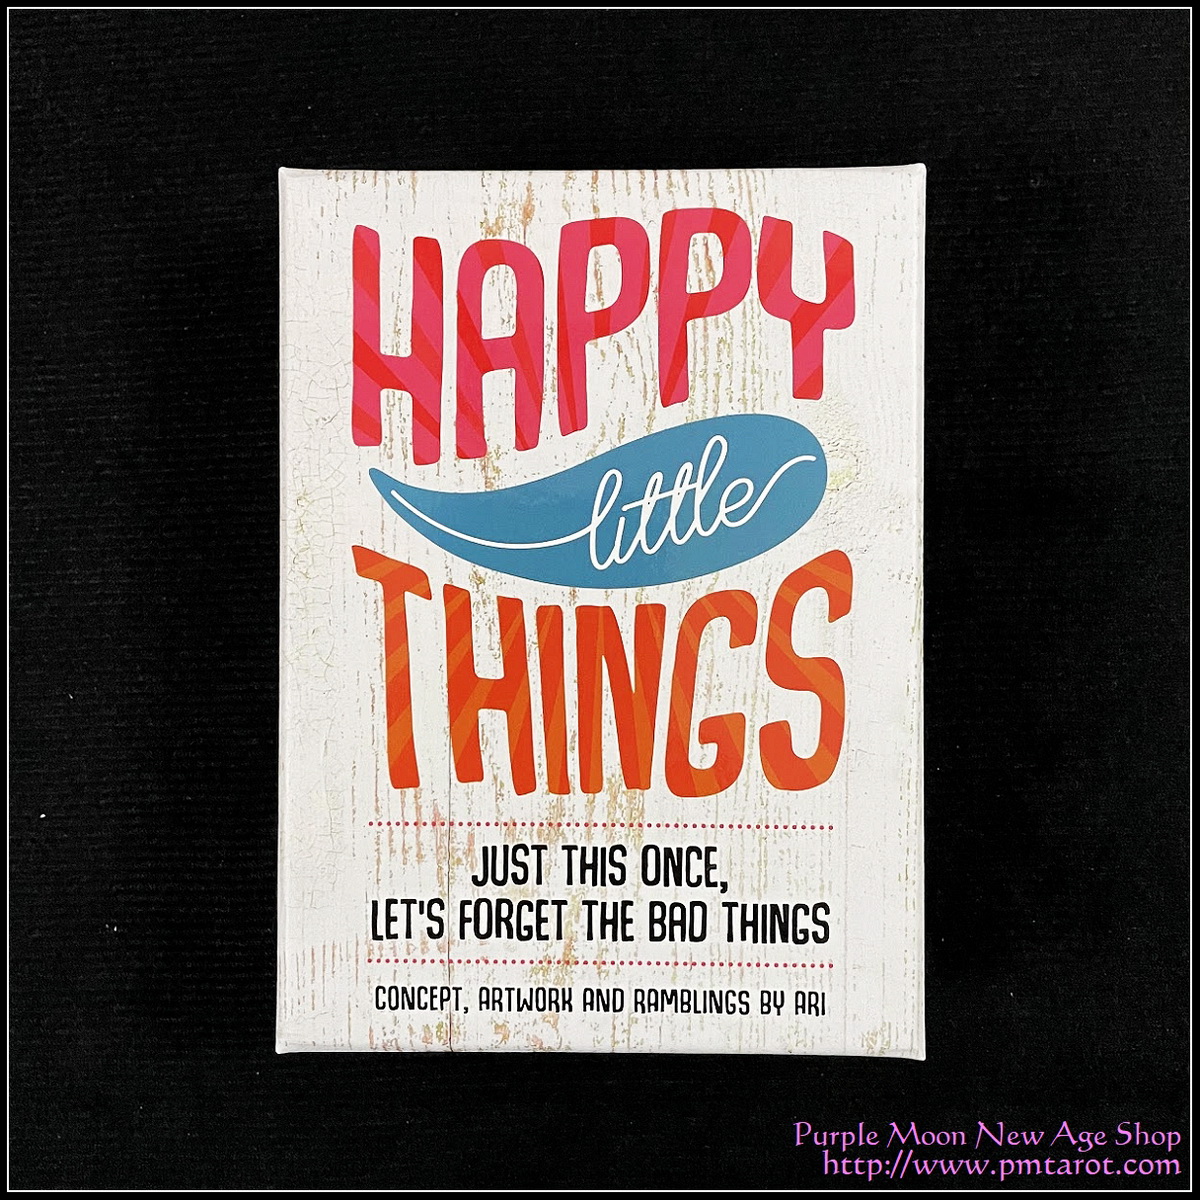 Happy Little Things Inspirational Cards